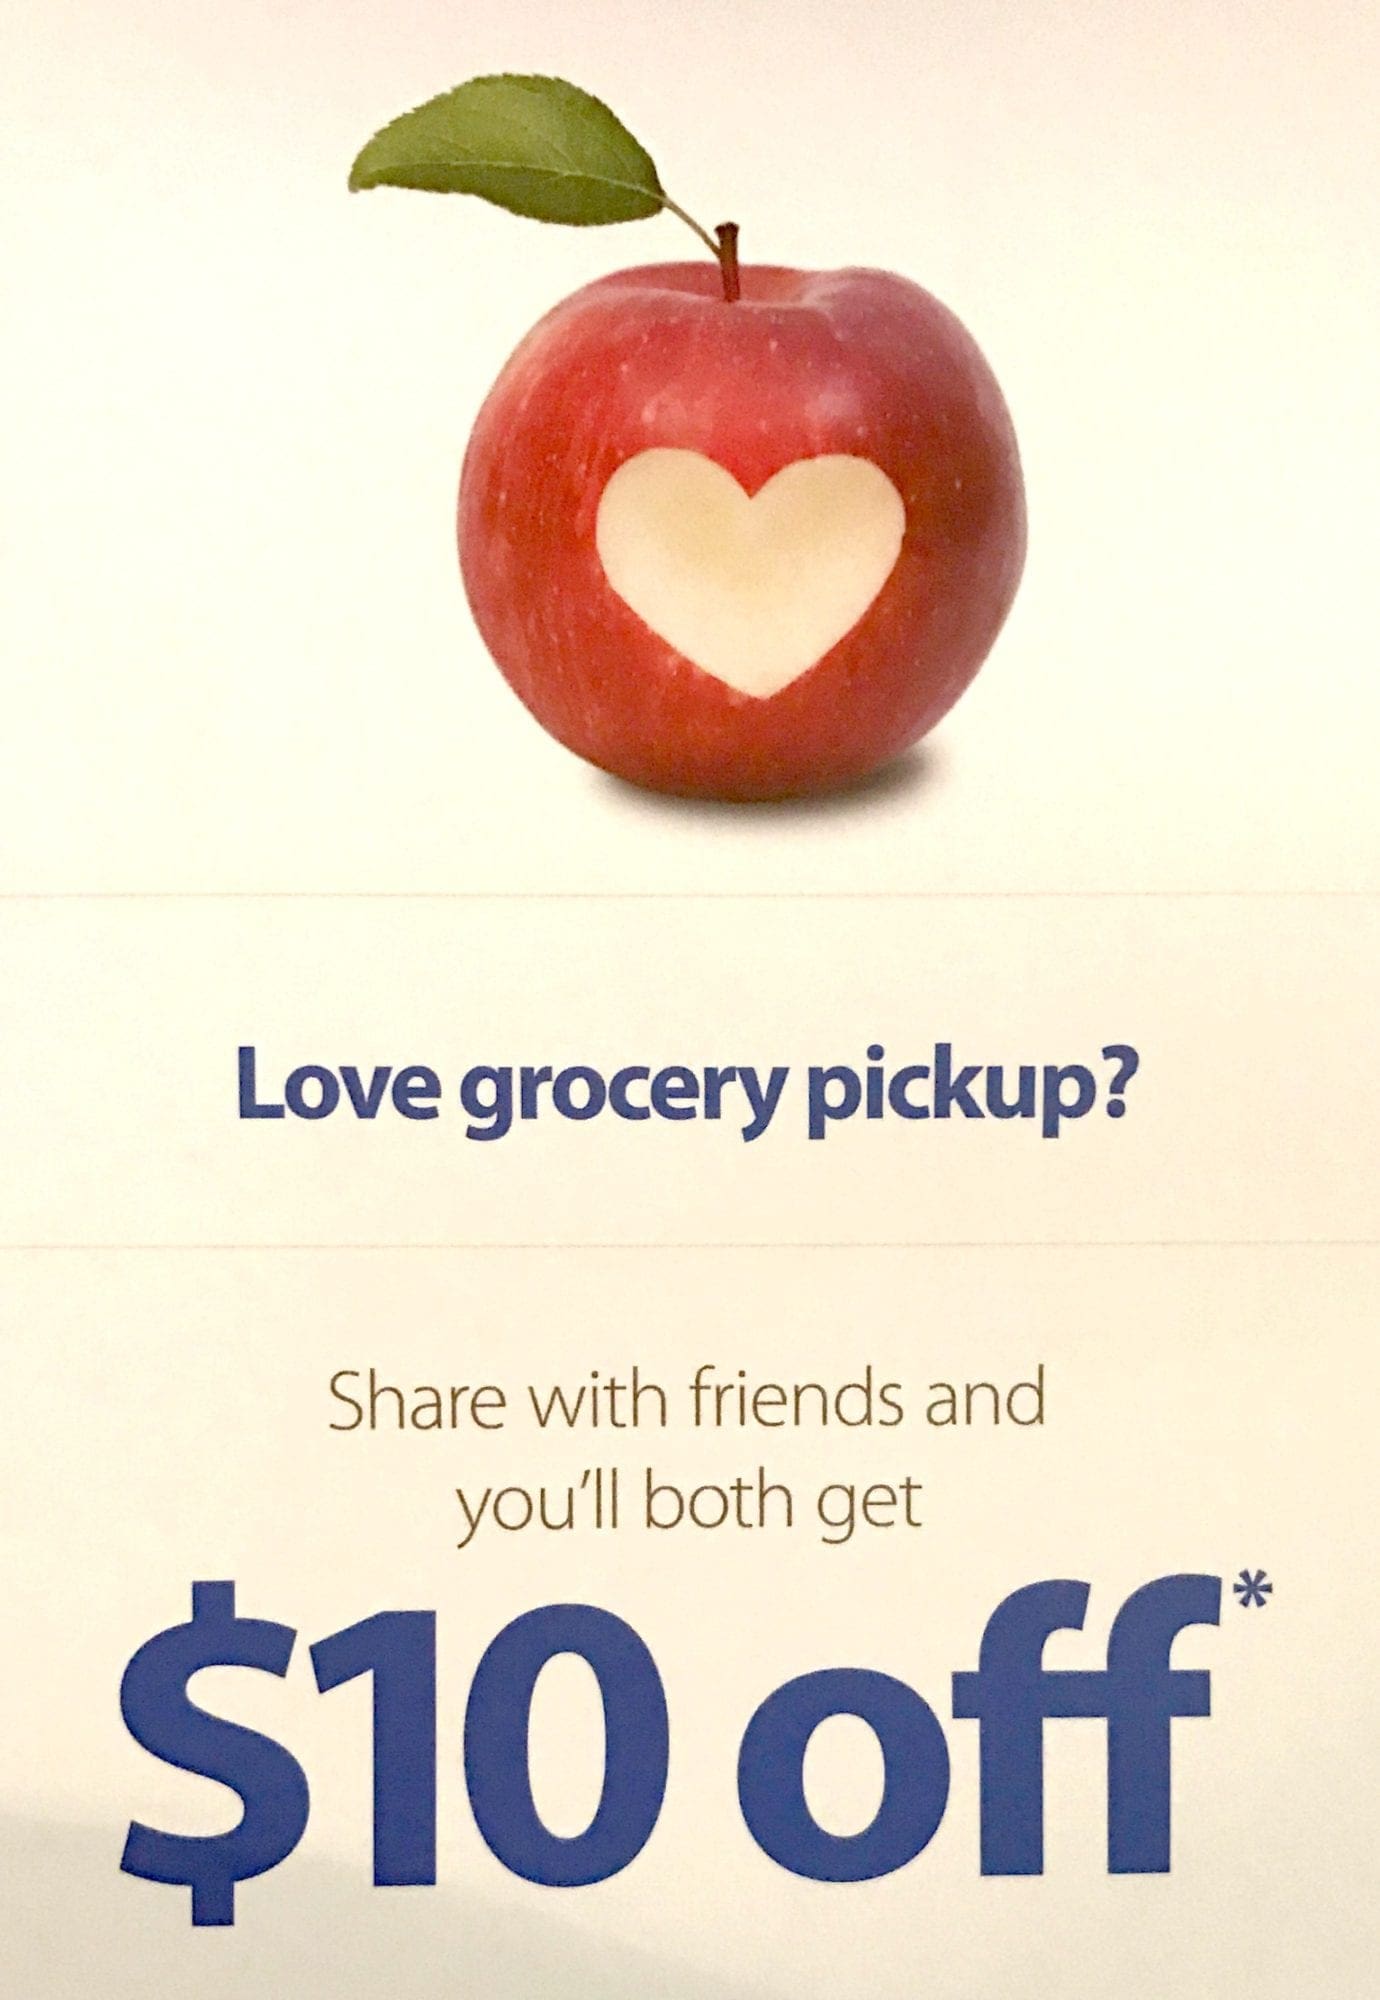 Use my referral code to get $10 off of your groceries